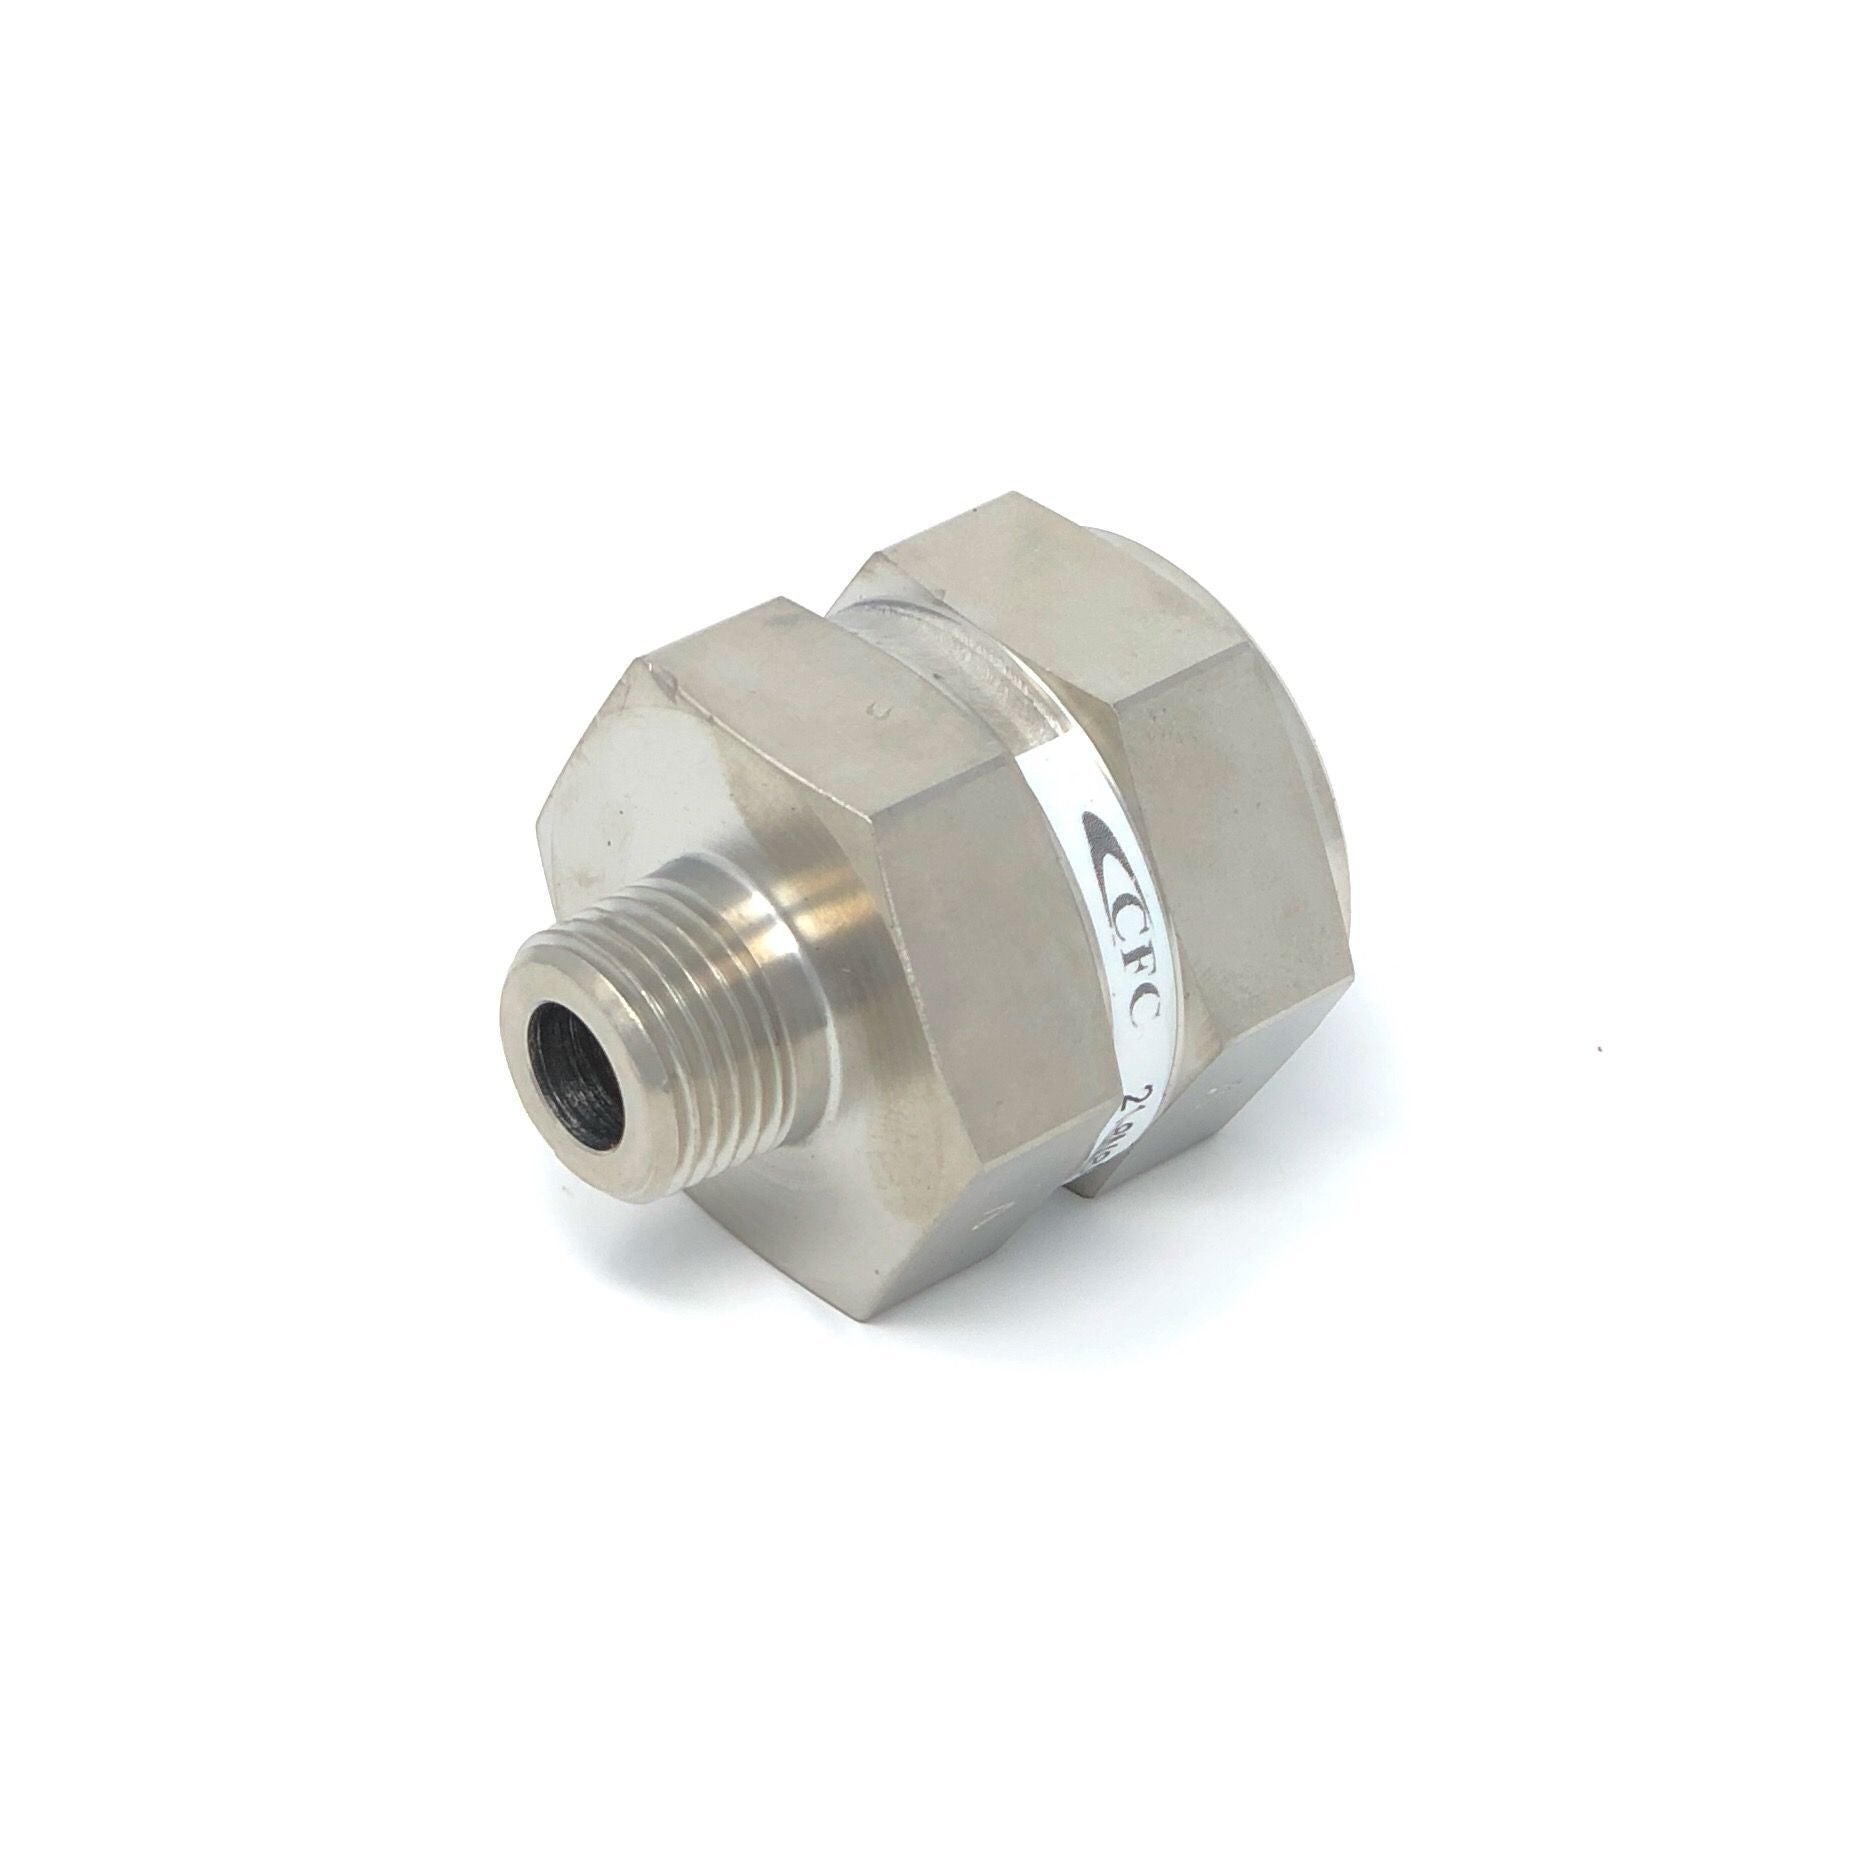 21-6P6P-25S : Chase High Pressure Inline Filter, 6000psi, 3/8" NPT, 25 Micron, No Visual Indicator, No Bypass